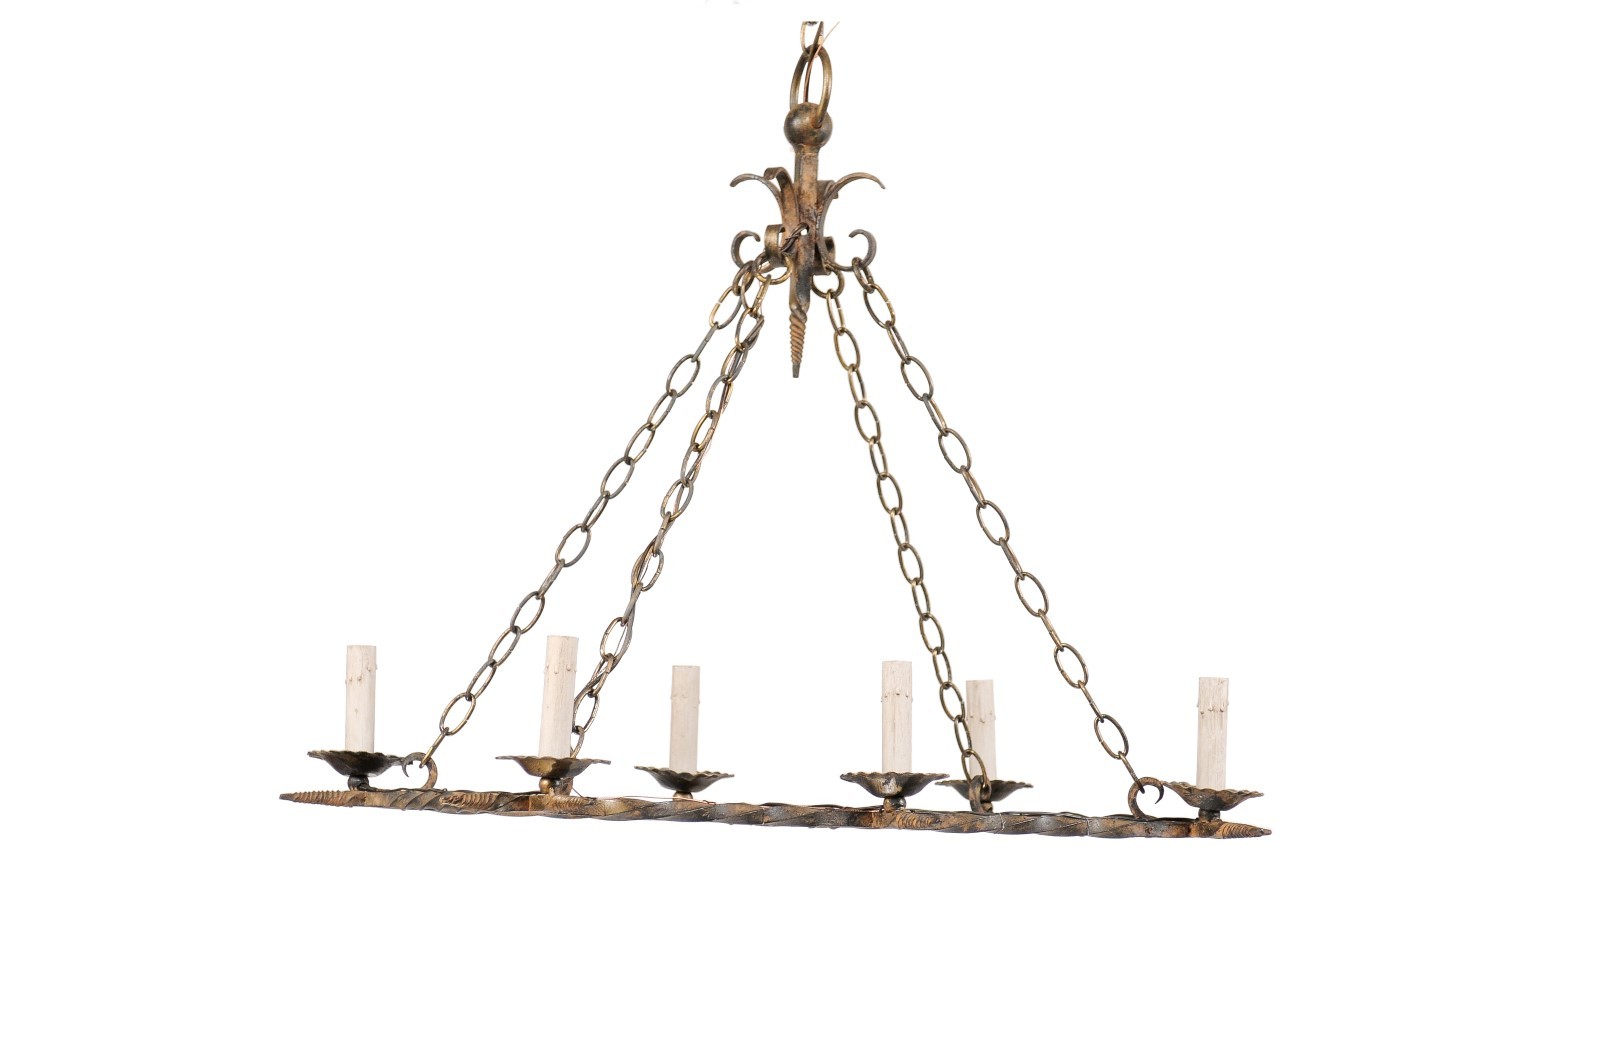 Vintage twisted iron chandelier